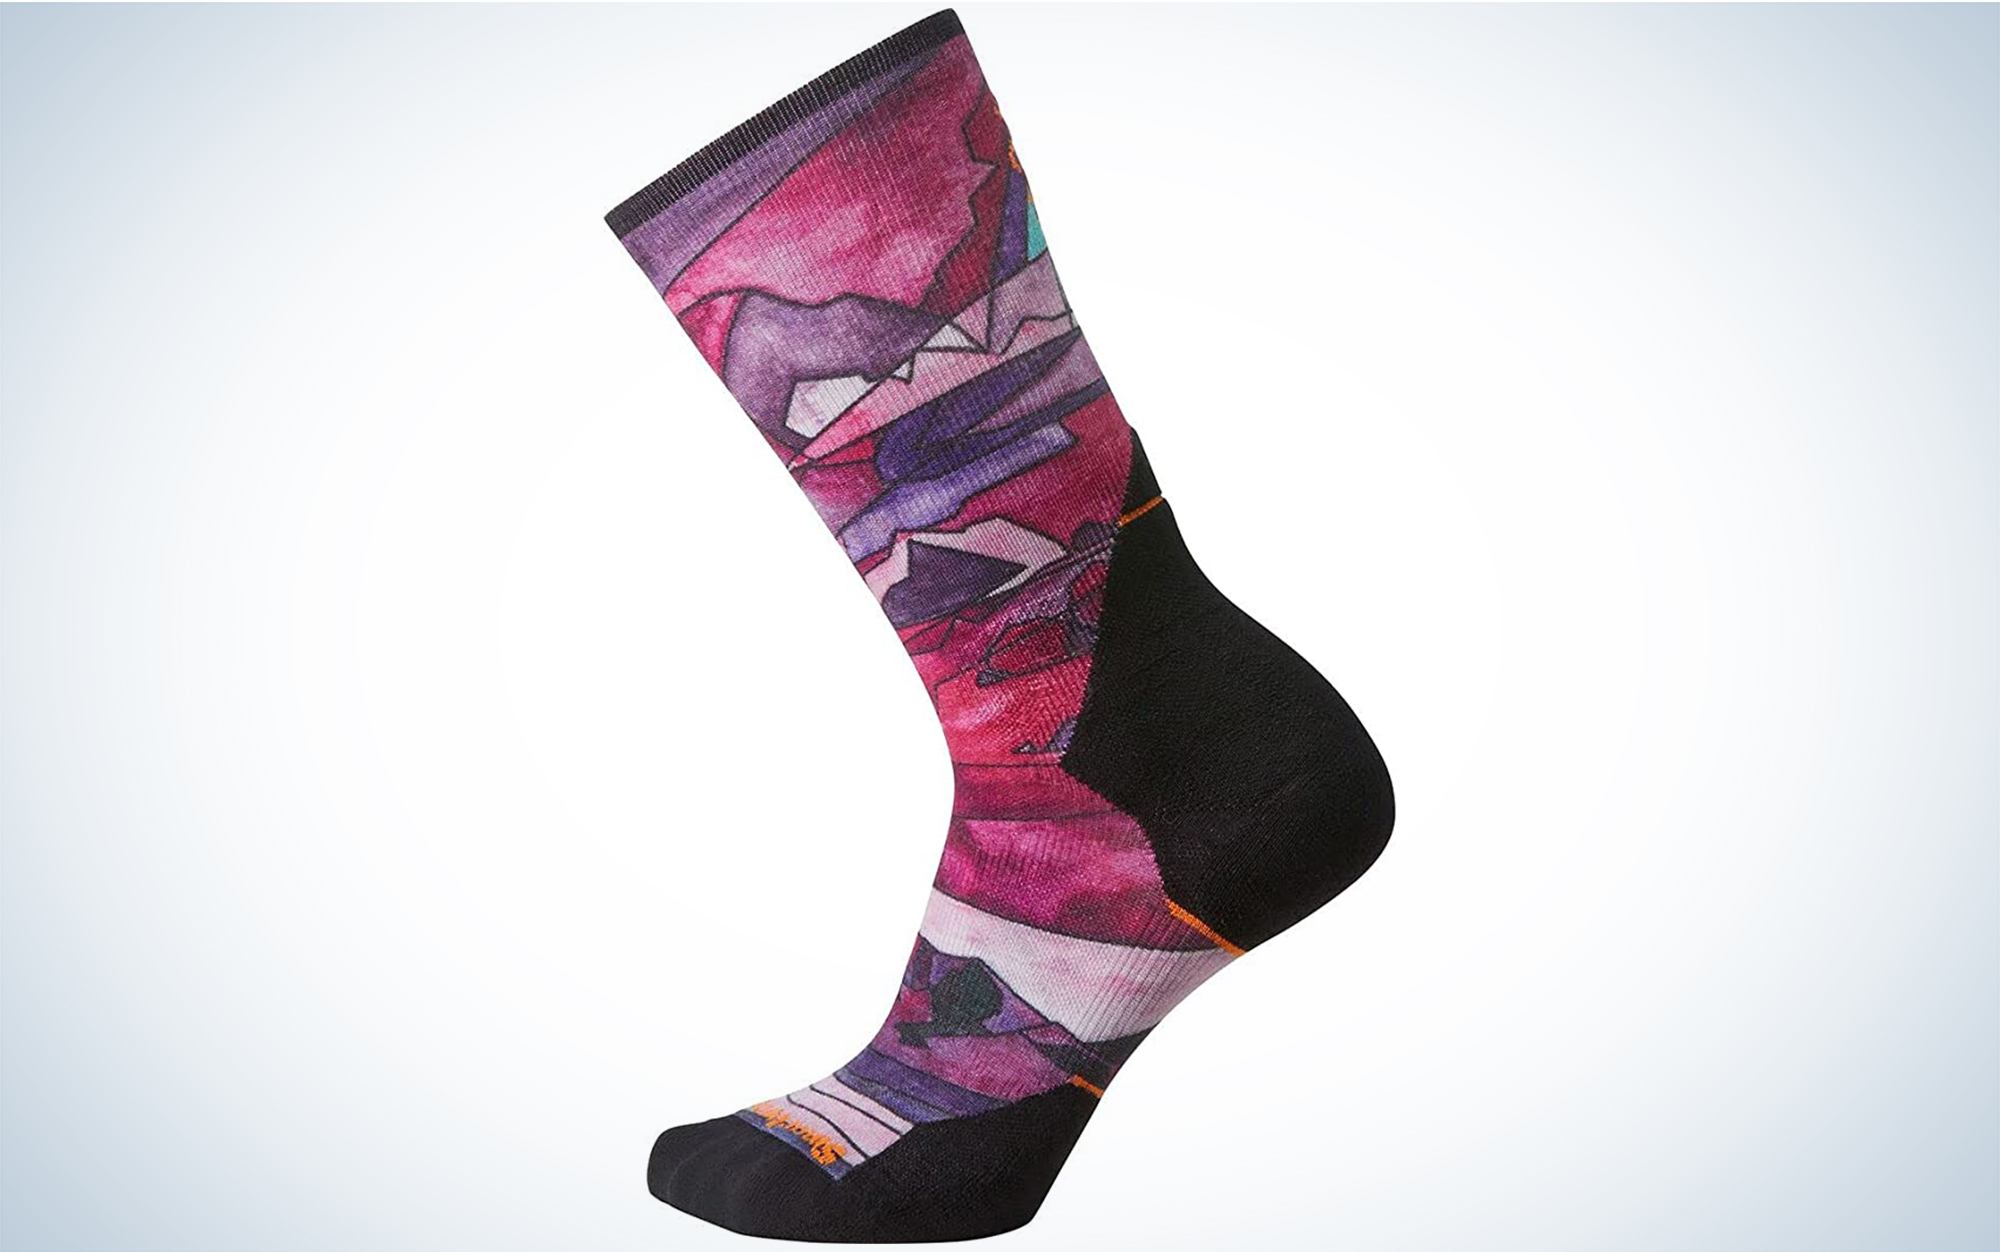 Smartwool Athlete Edition Run Mountain Print Crew Socks are best for trail running.